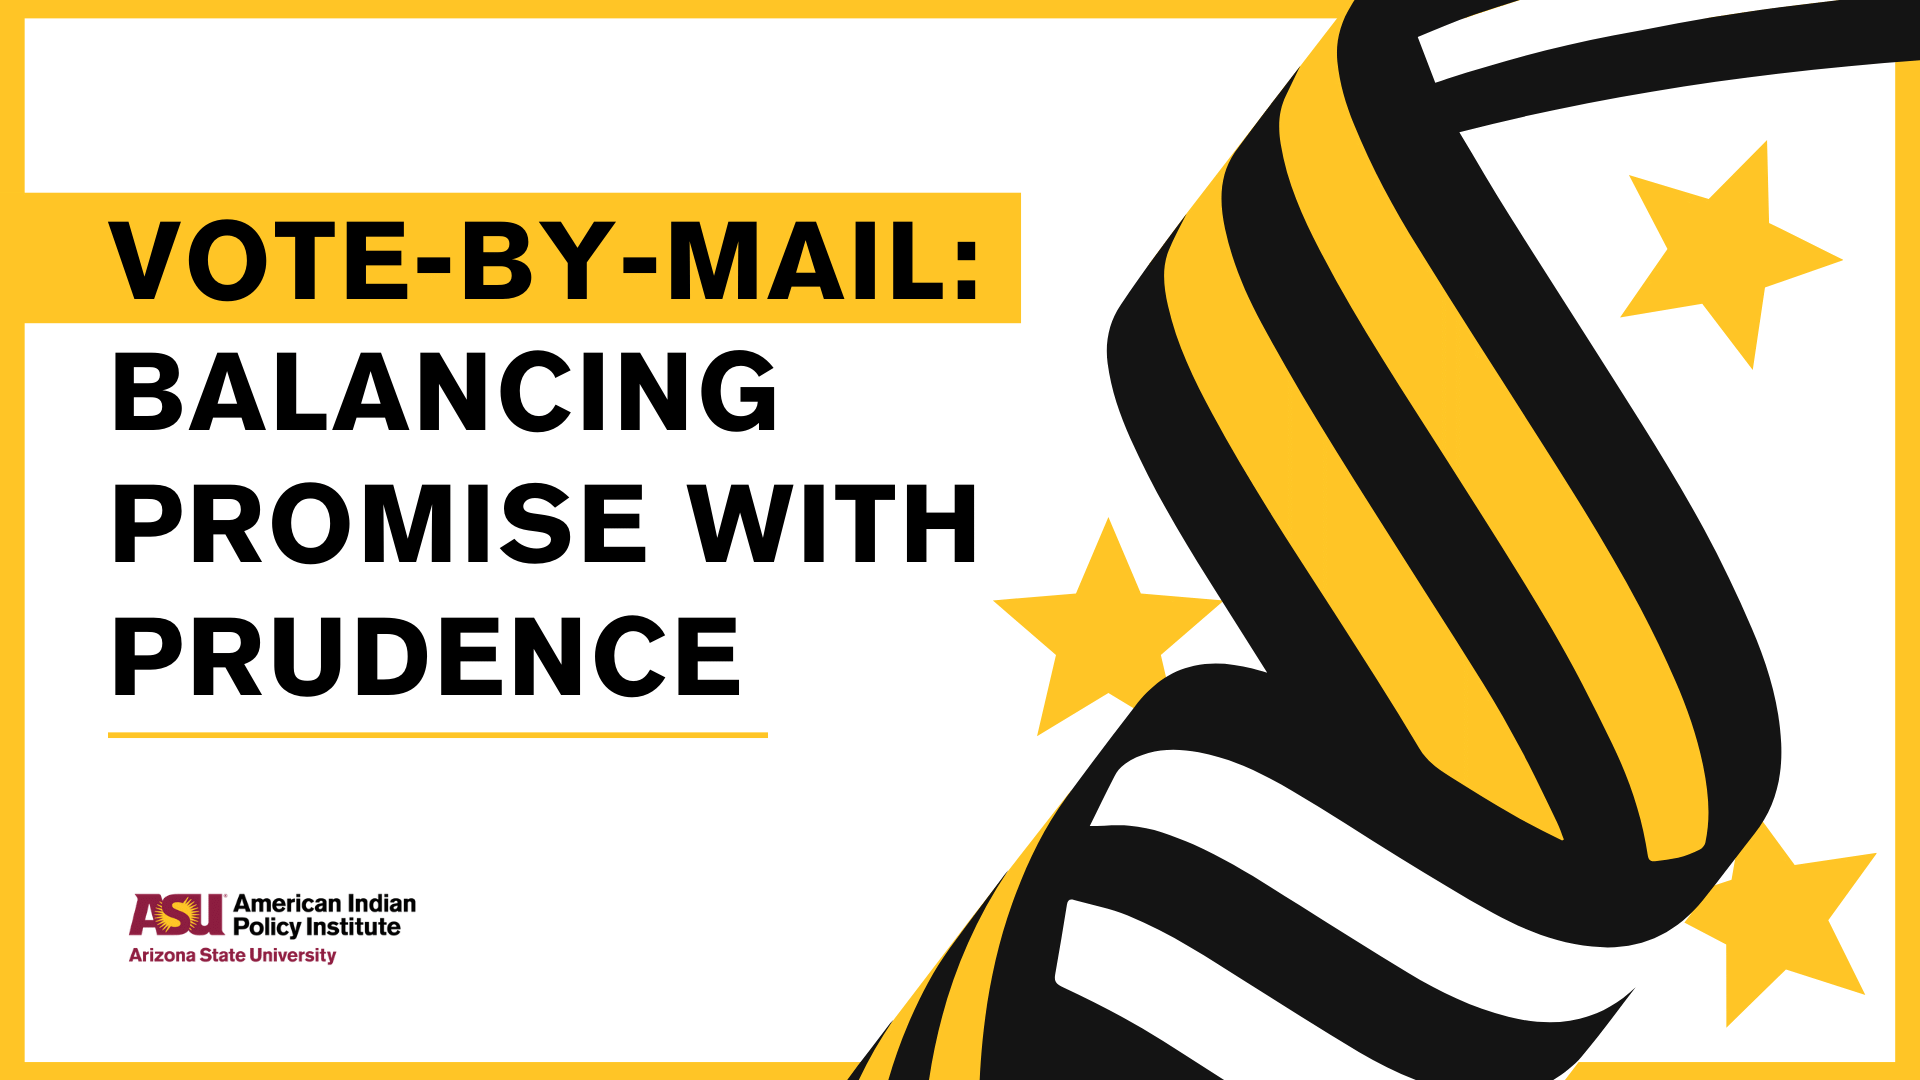 Vote-by-Mail Balancing Promise with Prudence